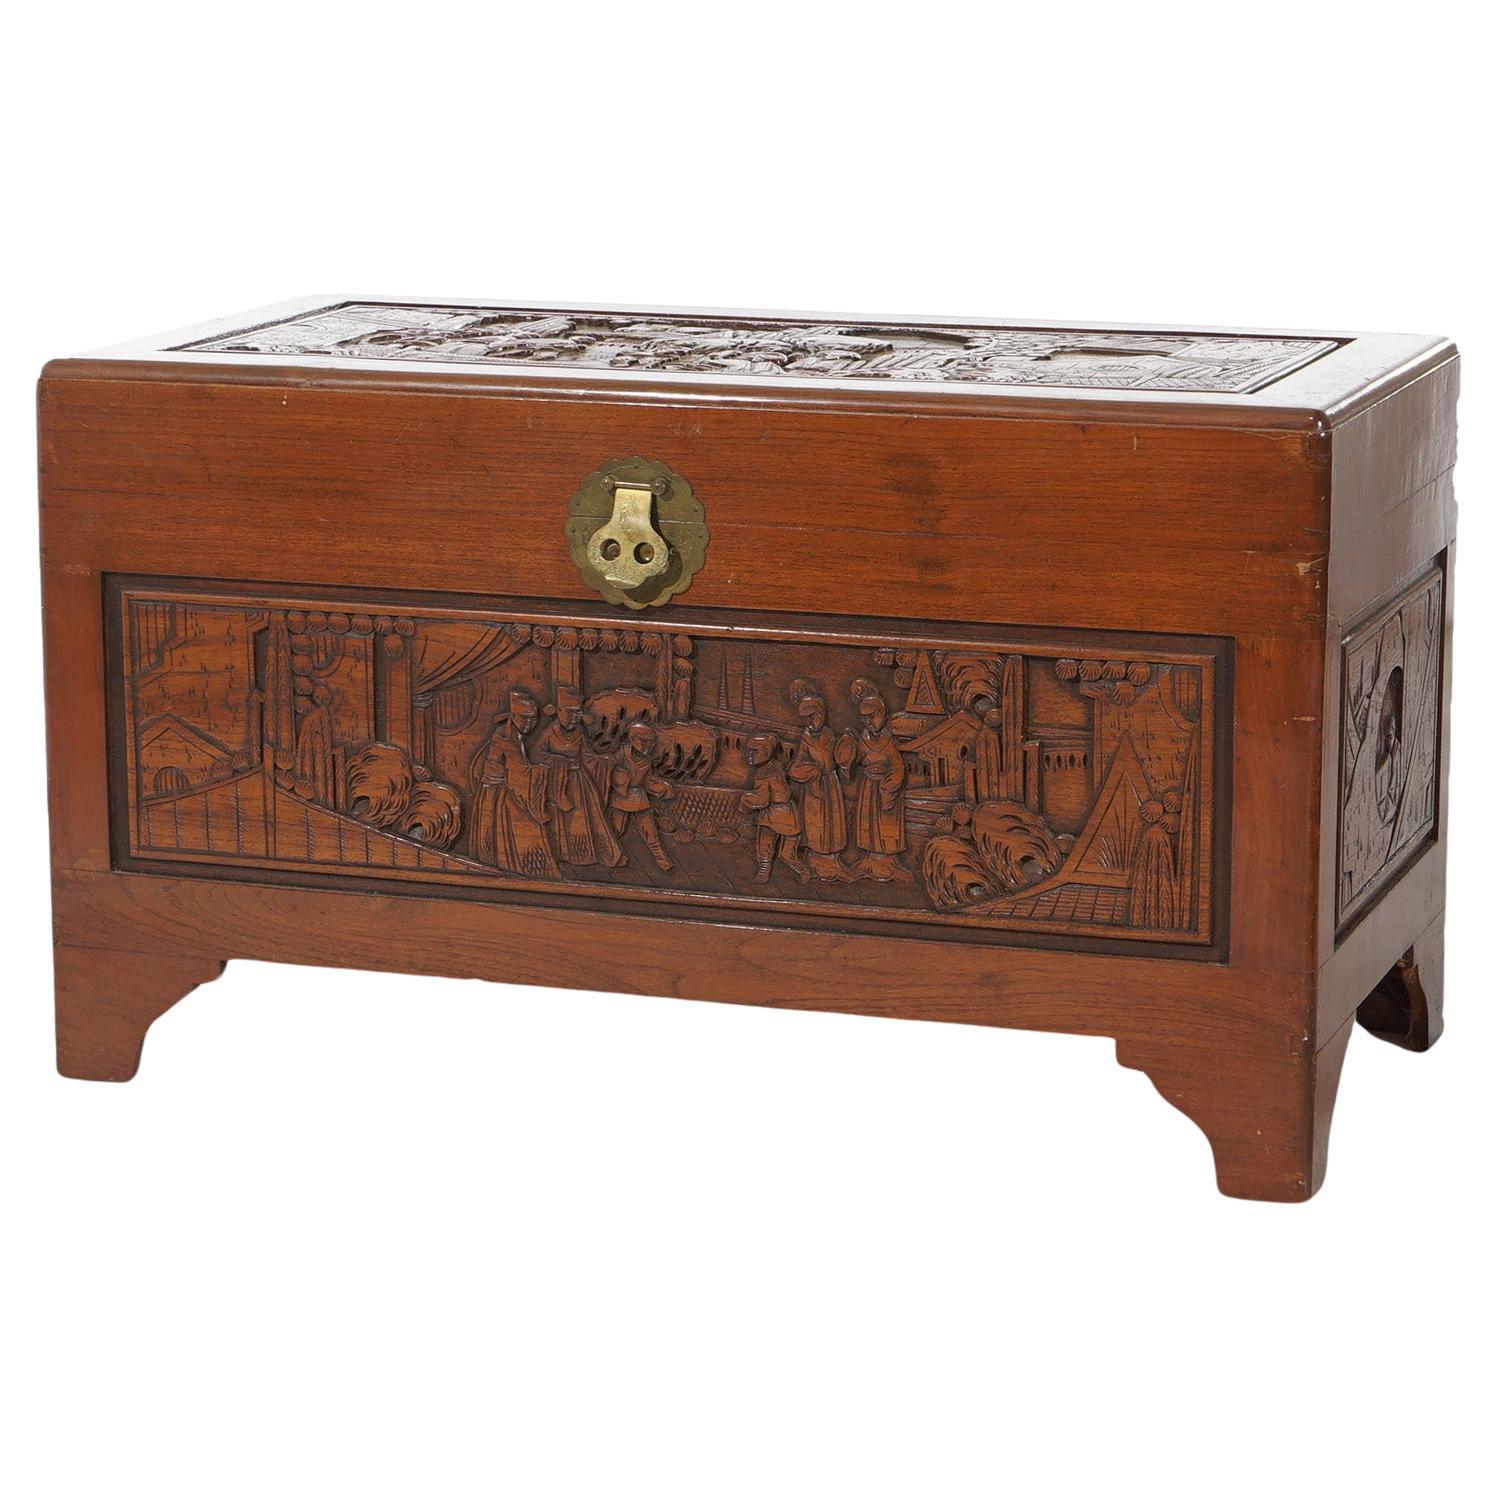 Chinese Carved Hardwood Figural Blanket Chest with Street Scene in Relief 20thC For Sale